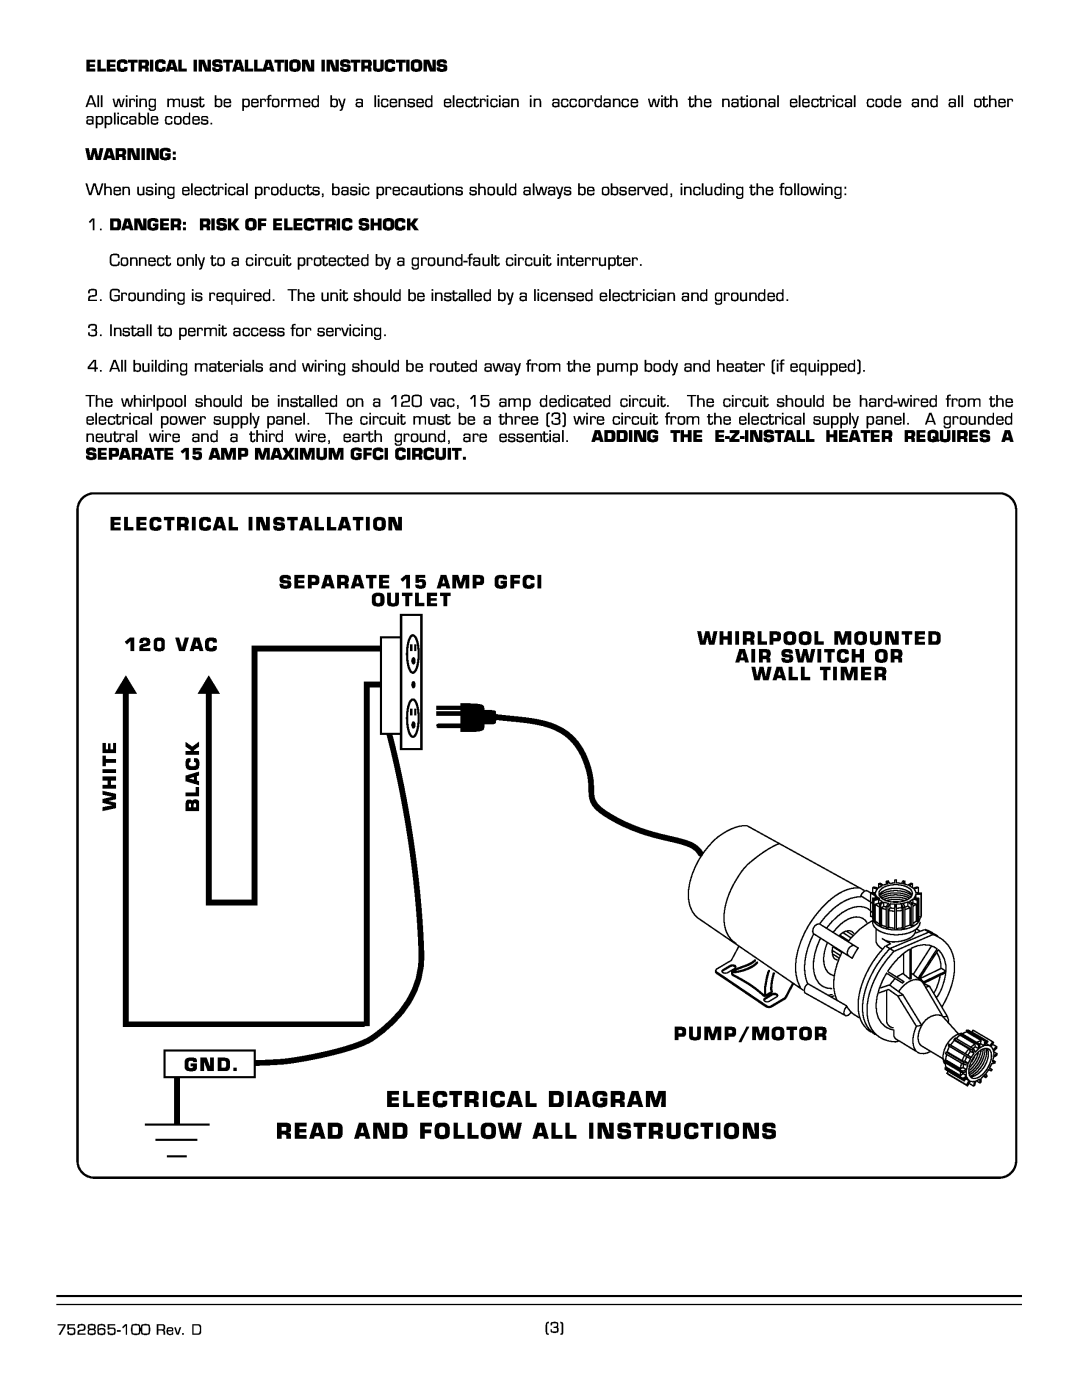 American Standard 2805E SERIES installation instructions Electrical Diagram, Read And Follow All Instructions 